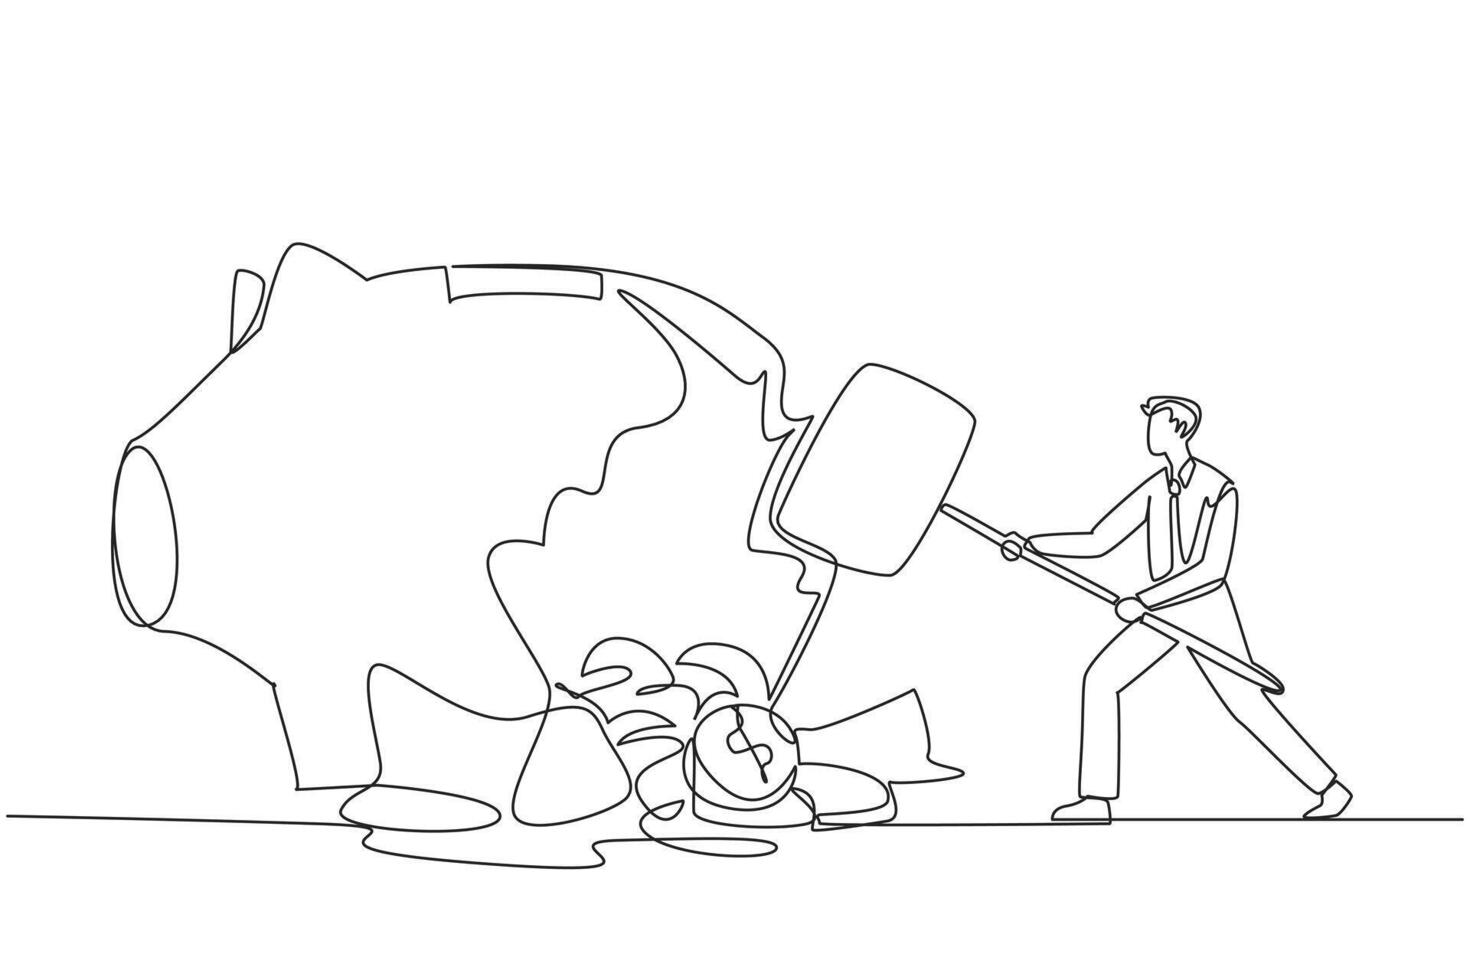 Single one line drawing businessman hit big piggy bank with a big hammer until it cracked. Coins scattered around. Urgent needs. Save the office. Bankrupt. Continuous line design graphic illustration vector